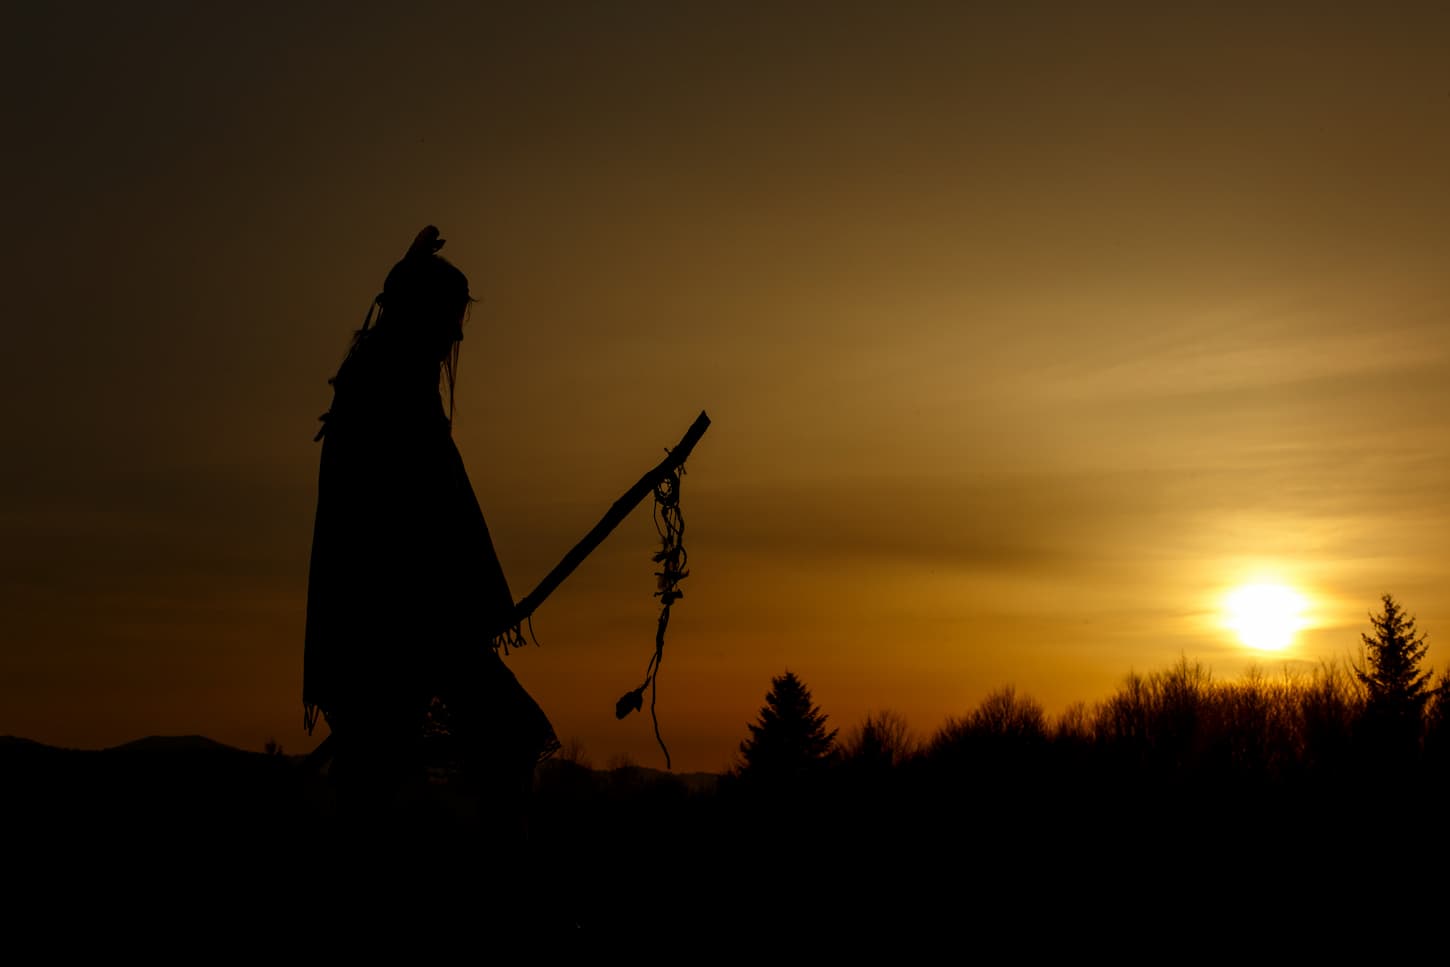 An image of a silhouette of a Native American shaman with pikestaff.